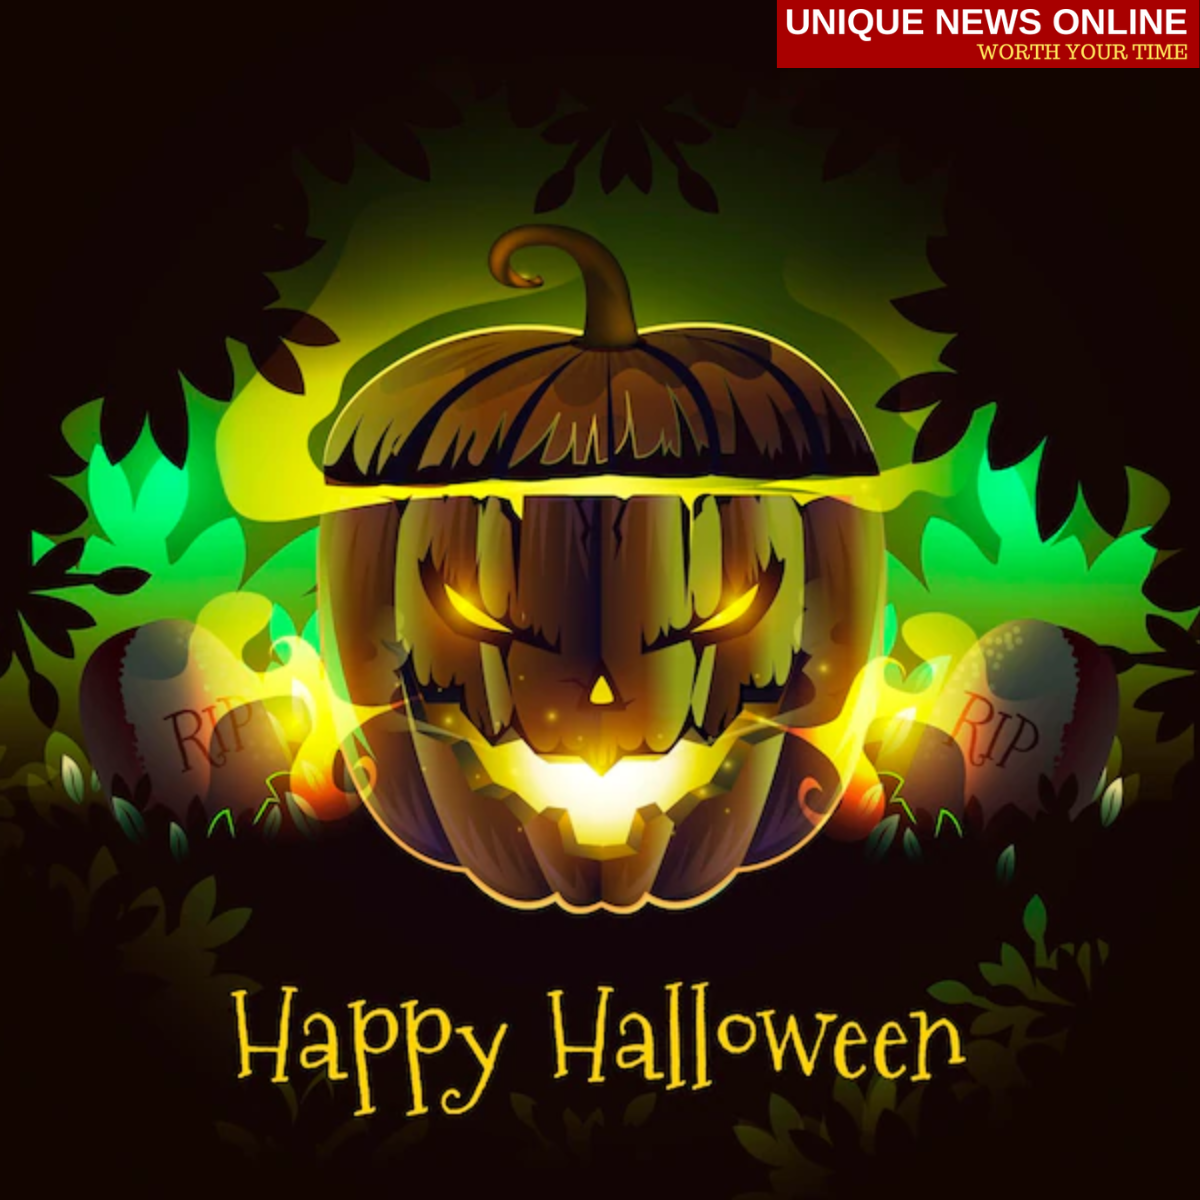 Happy Halloween 2022 Wishes for Granddaughter, Sayings, Images, Messages, Greetings and Quotes